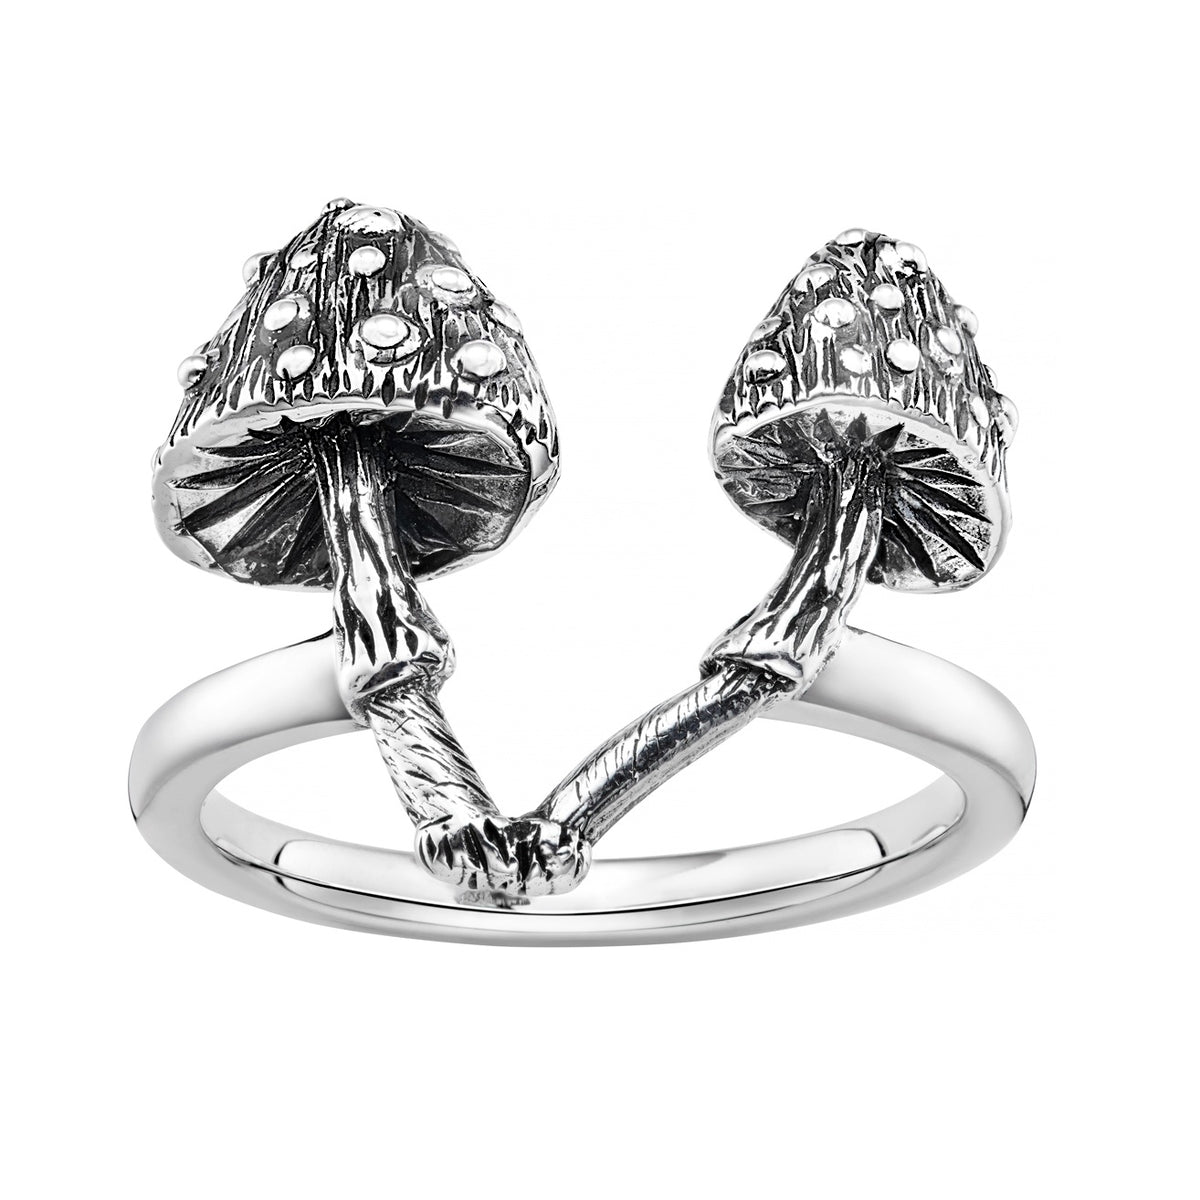 Sterling silver toadstool mushroom ring nature inspired jewellery witchy bohemian 